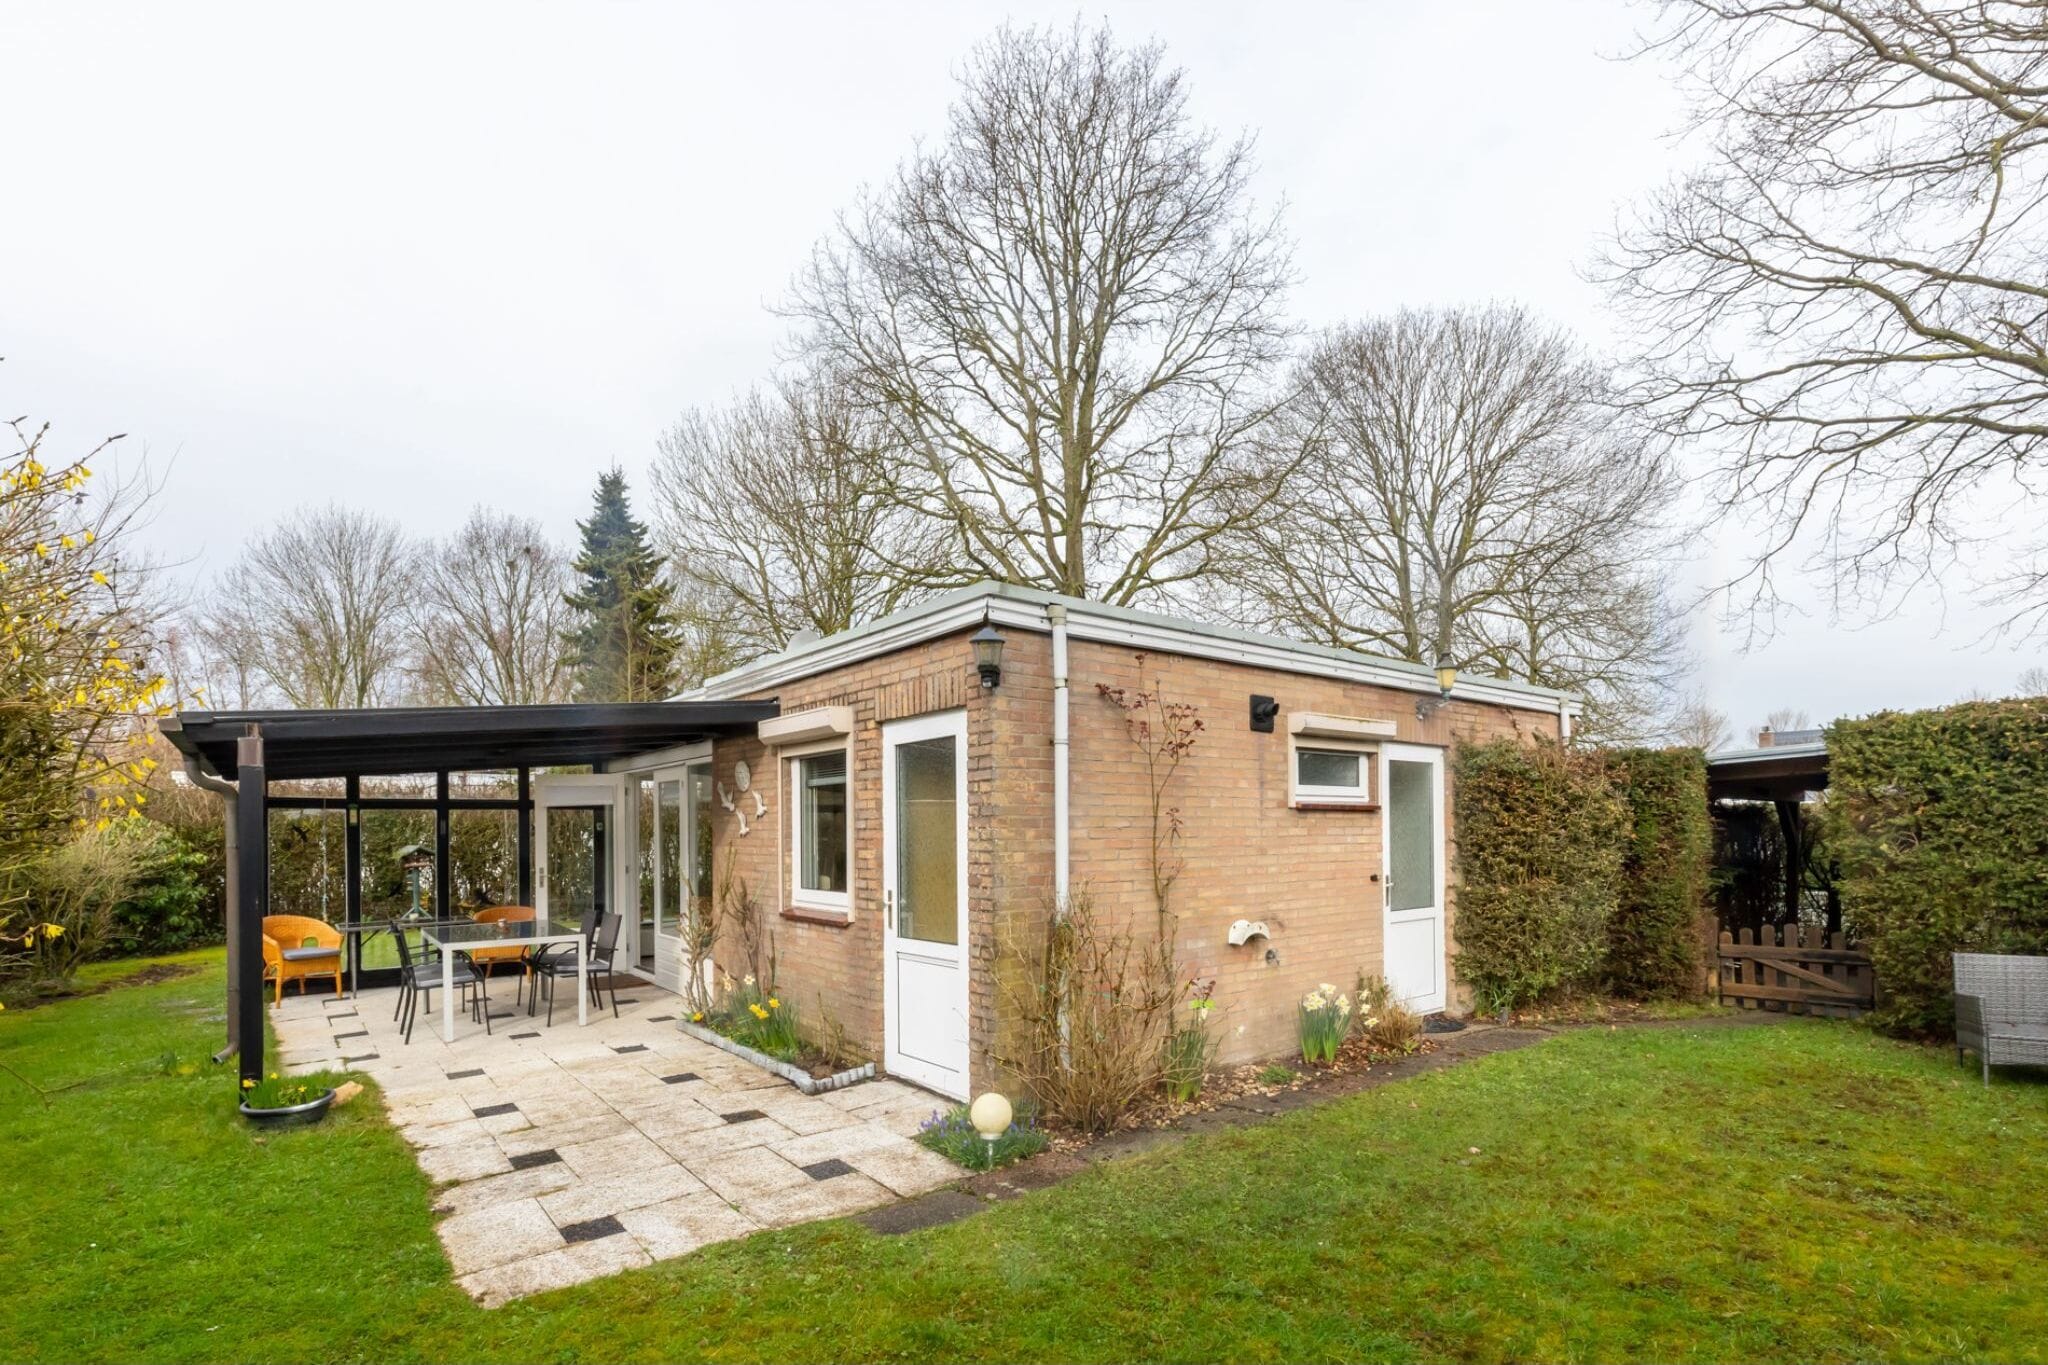 Holiday home near the popular Veerse Meer